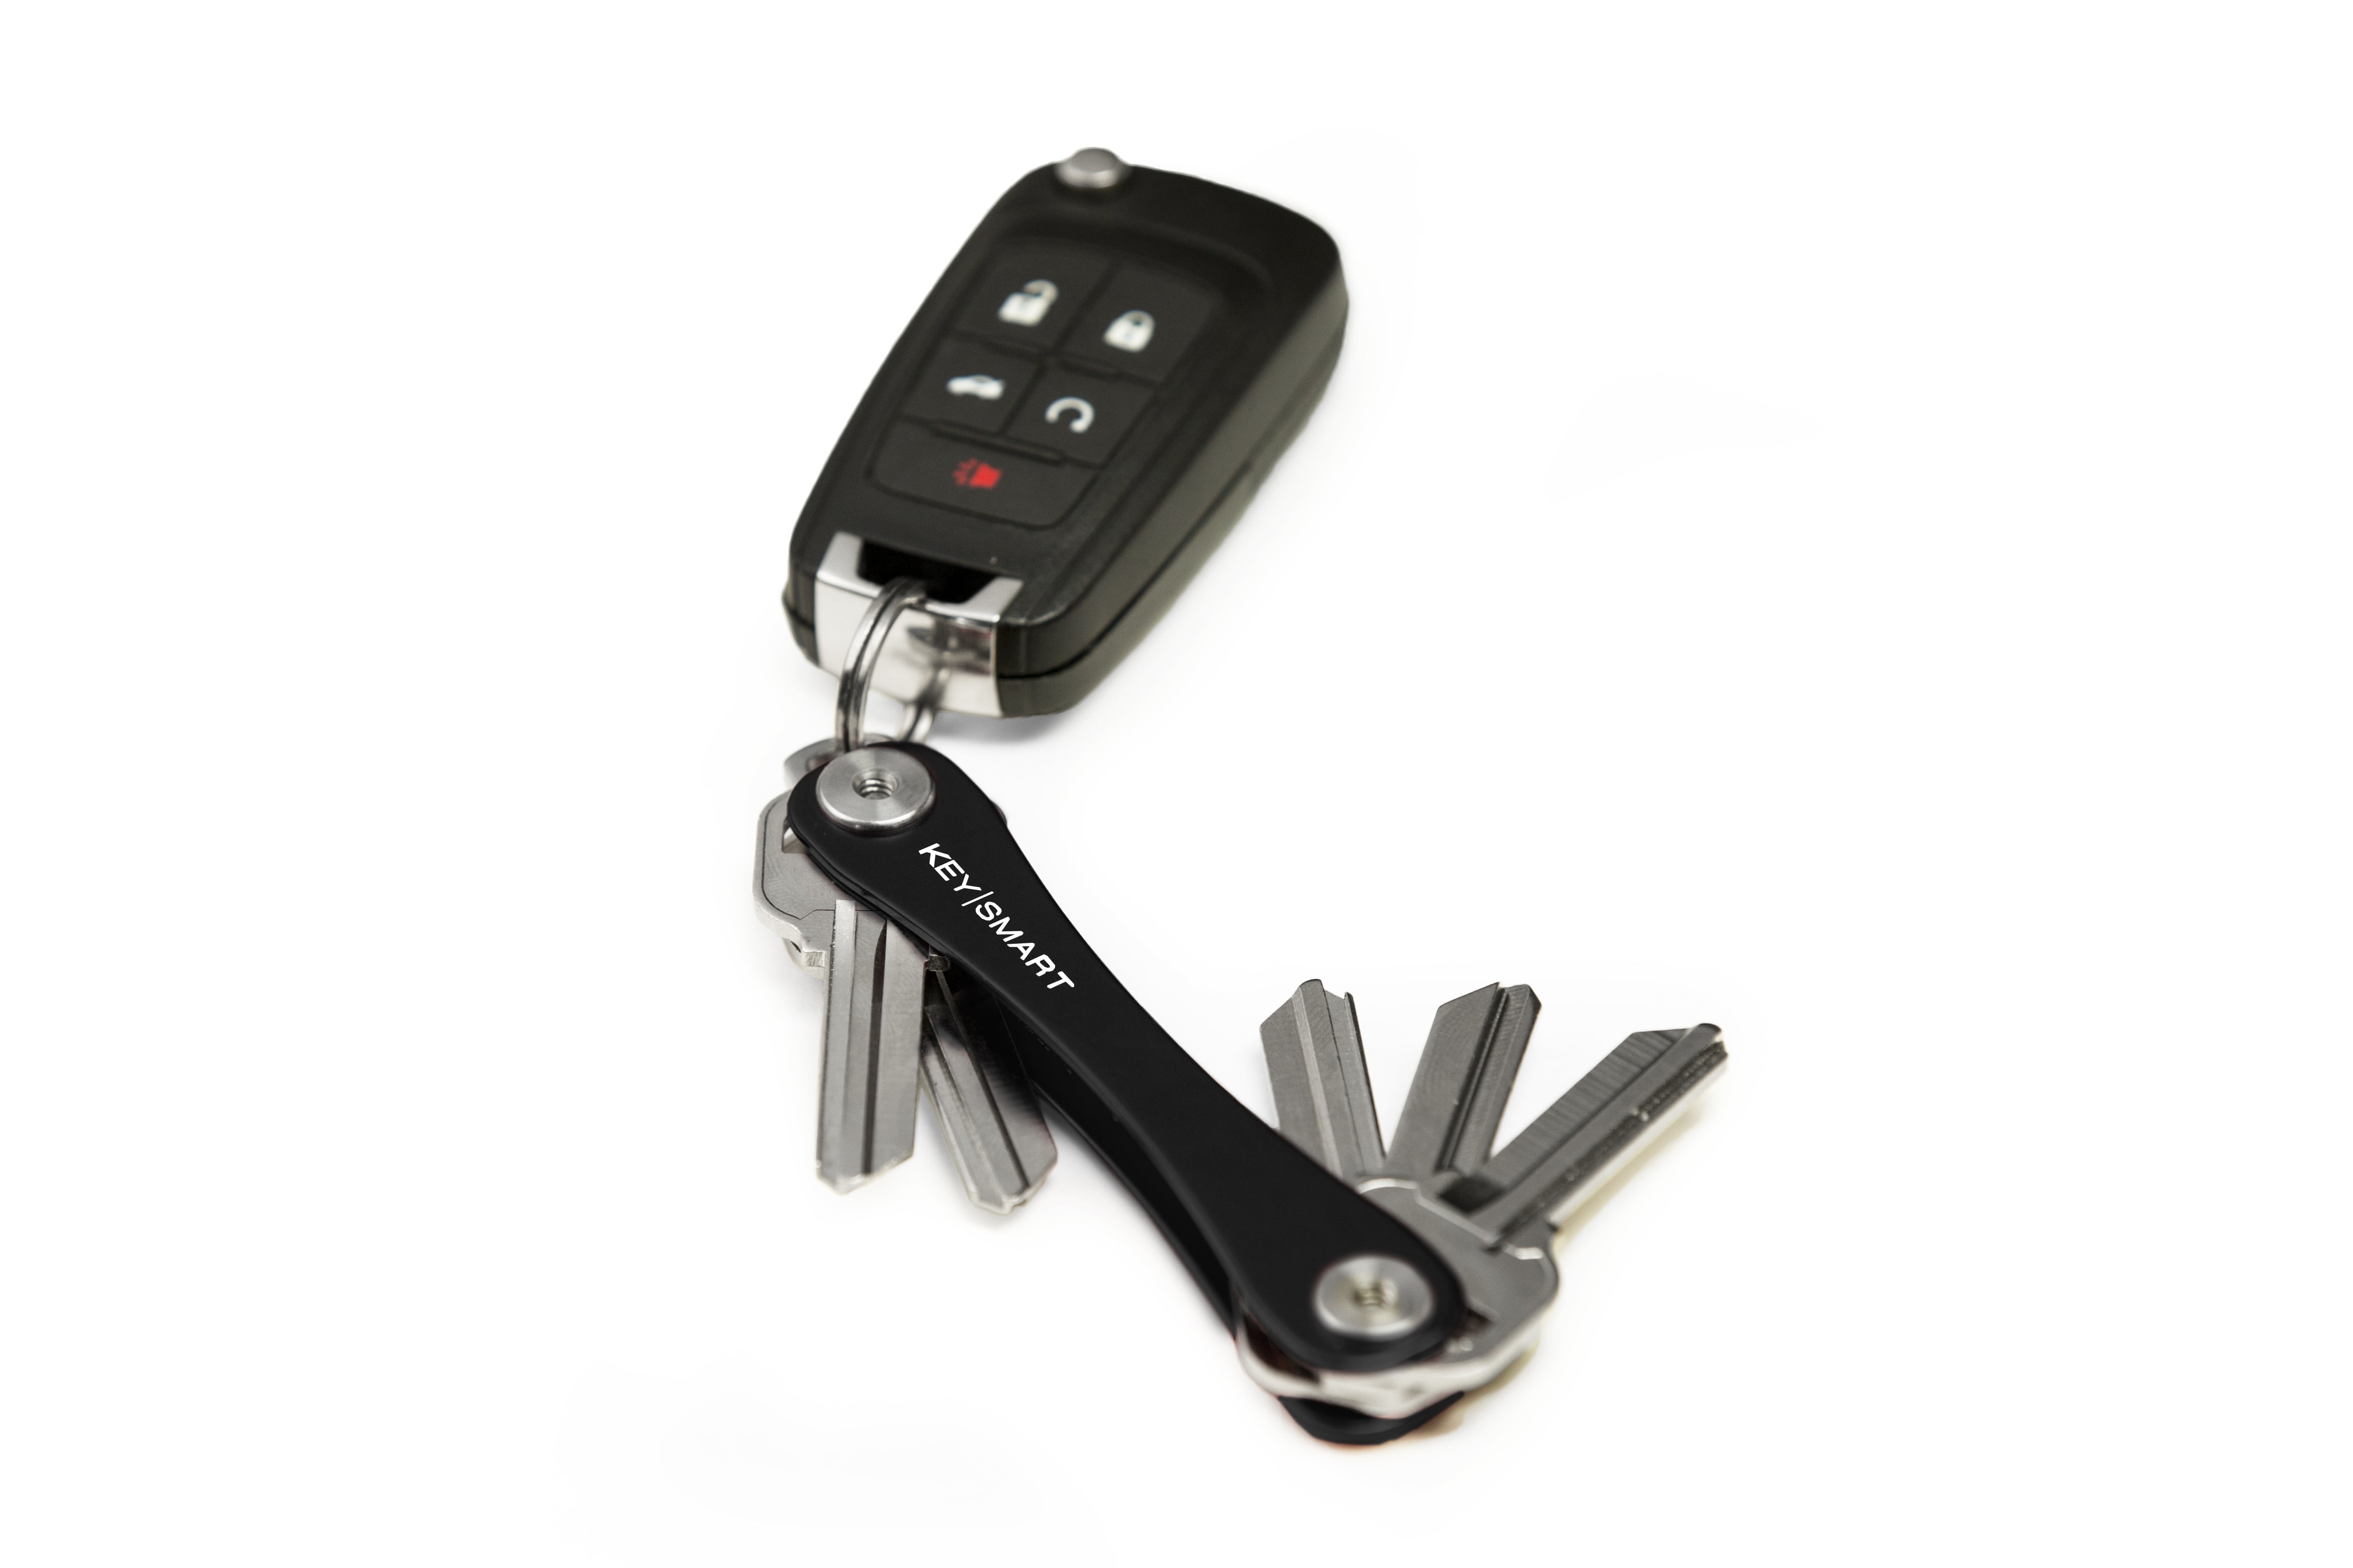 compact key holder review